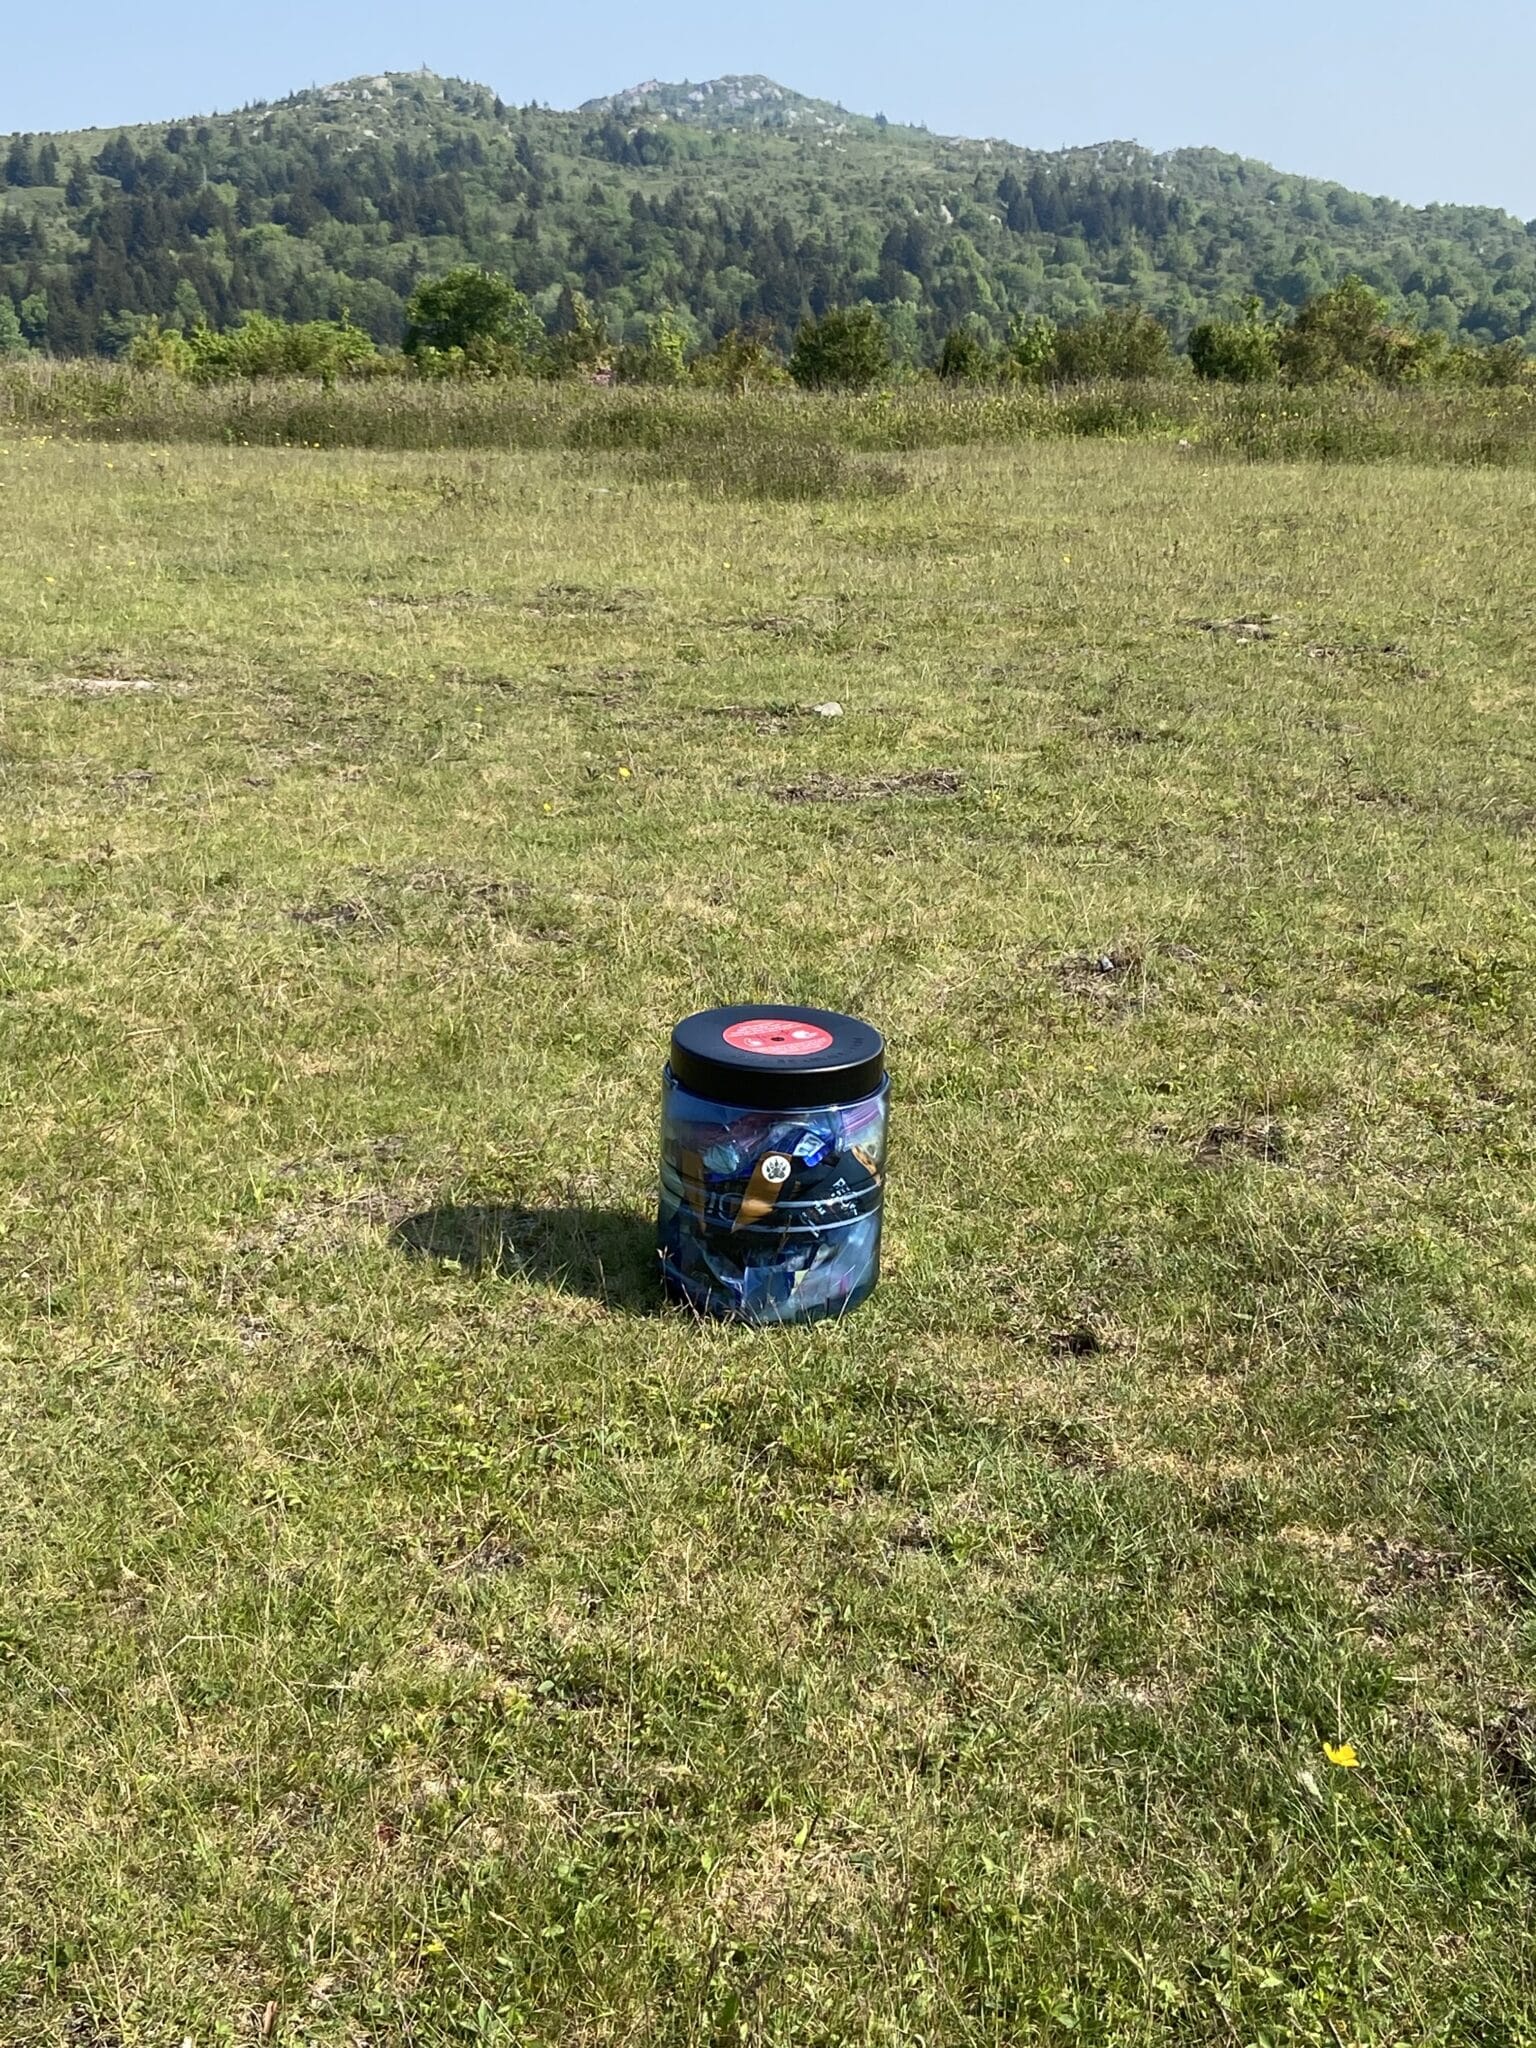 A BearVault BV475 sitting in an open grassy field with boulder-dotted peaks in the background.